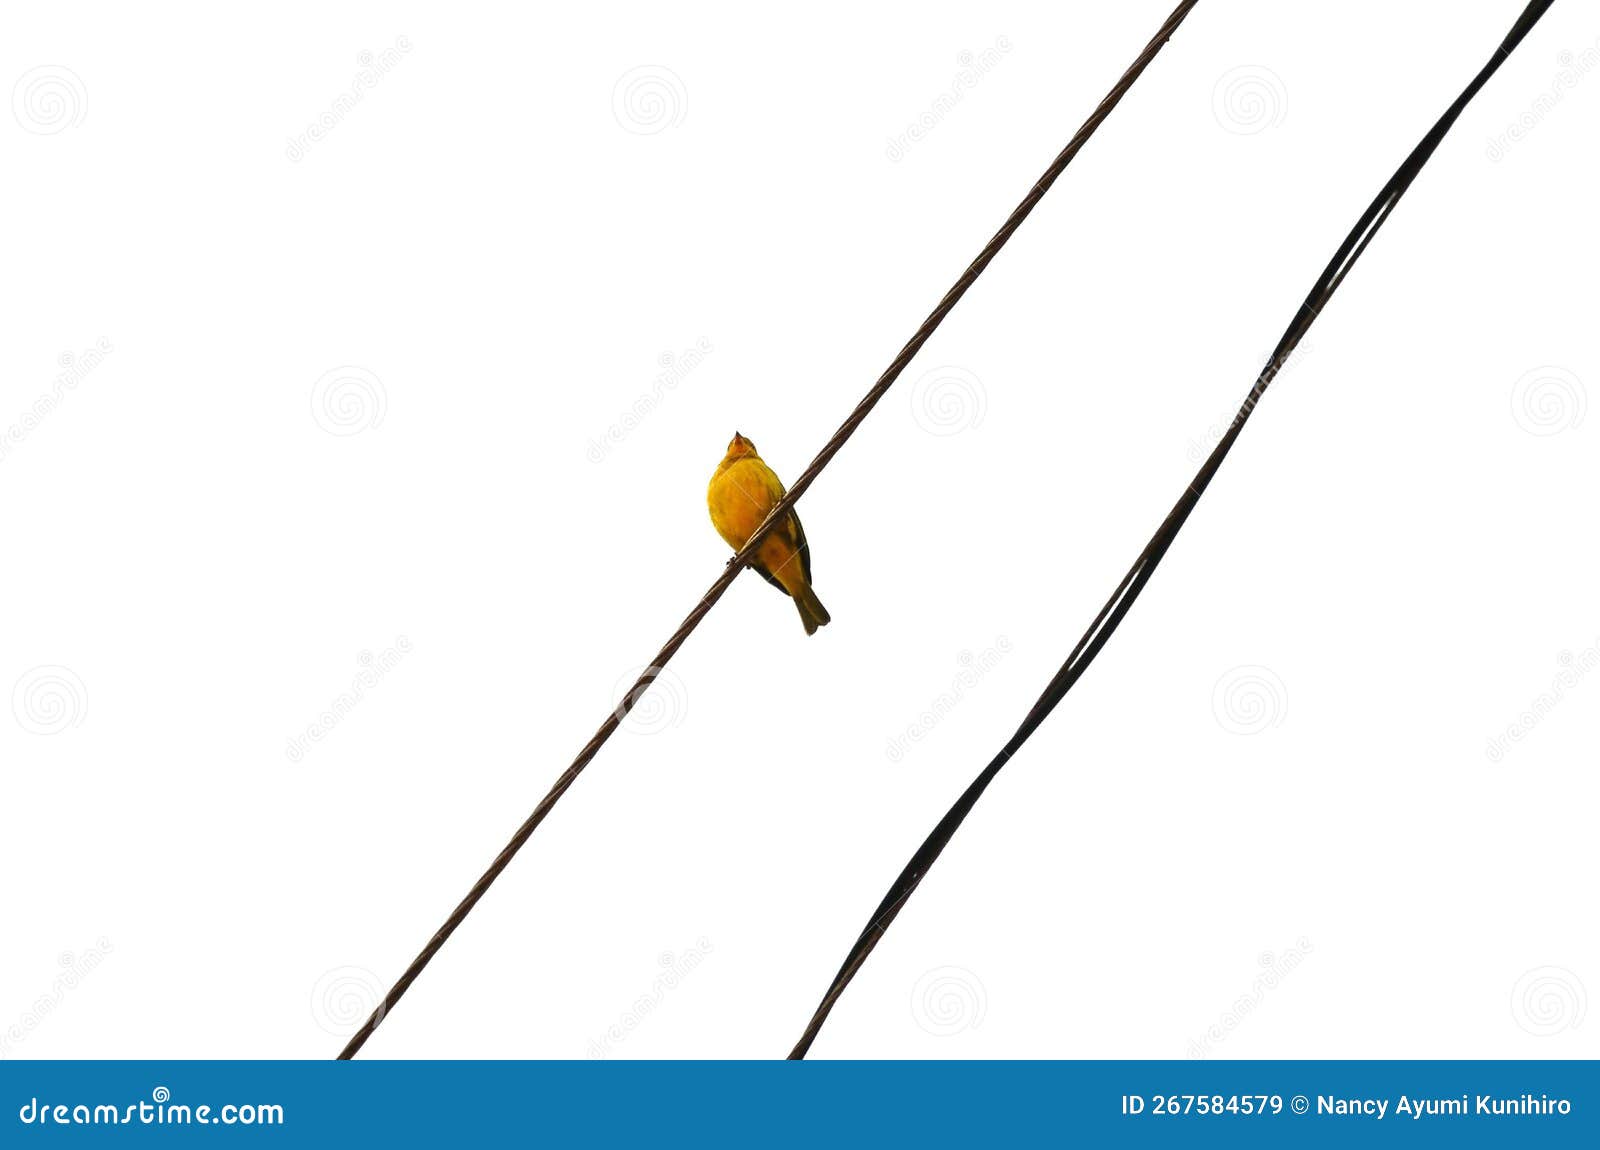 on the electric wire a sicalis flaveola bird perched